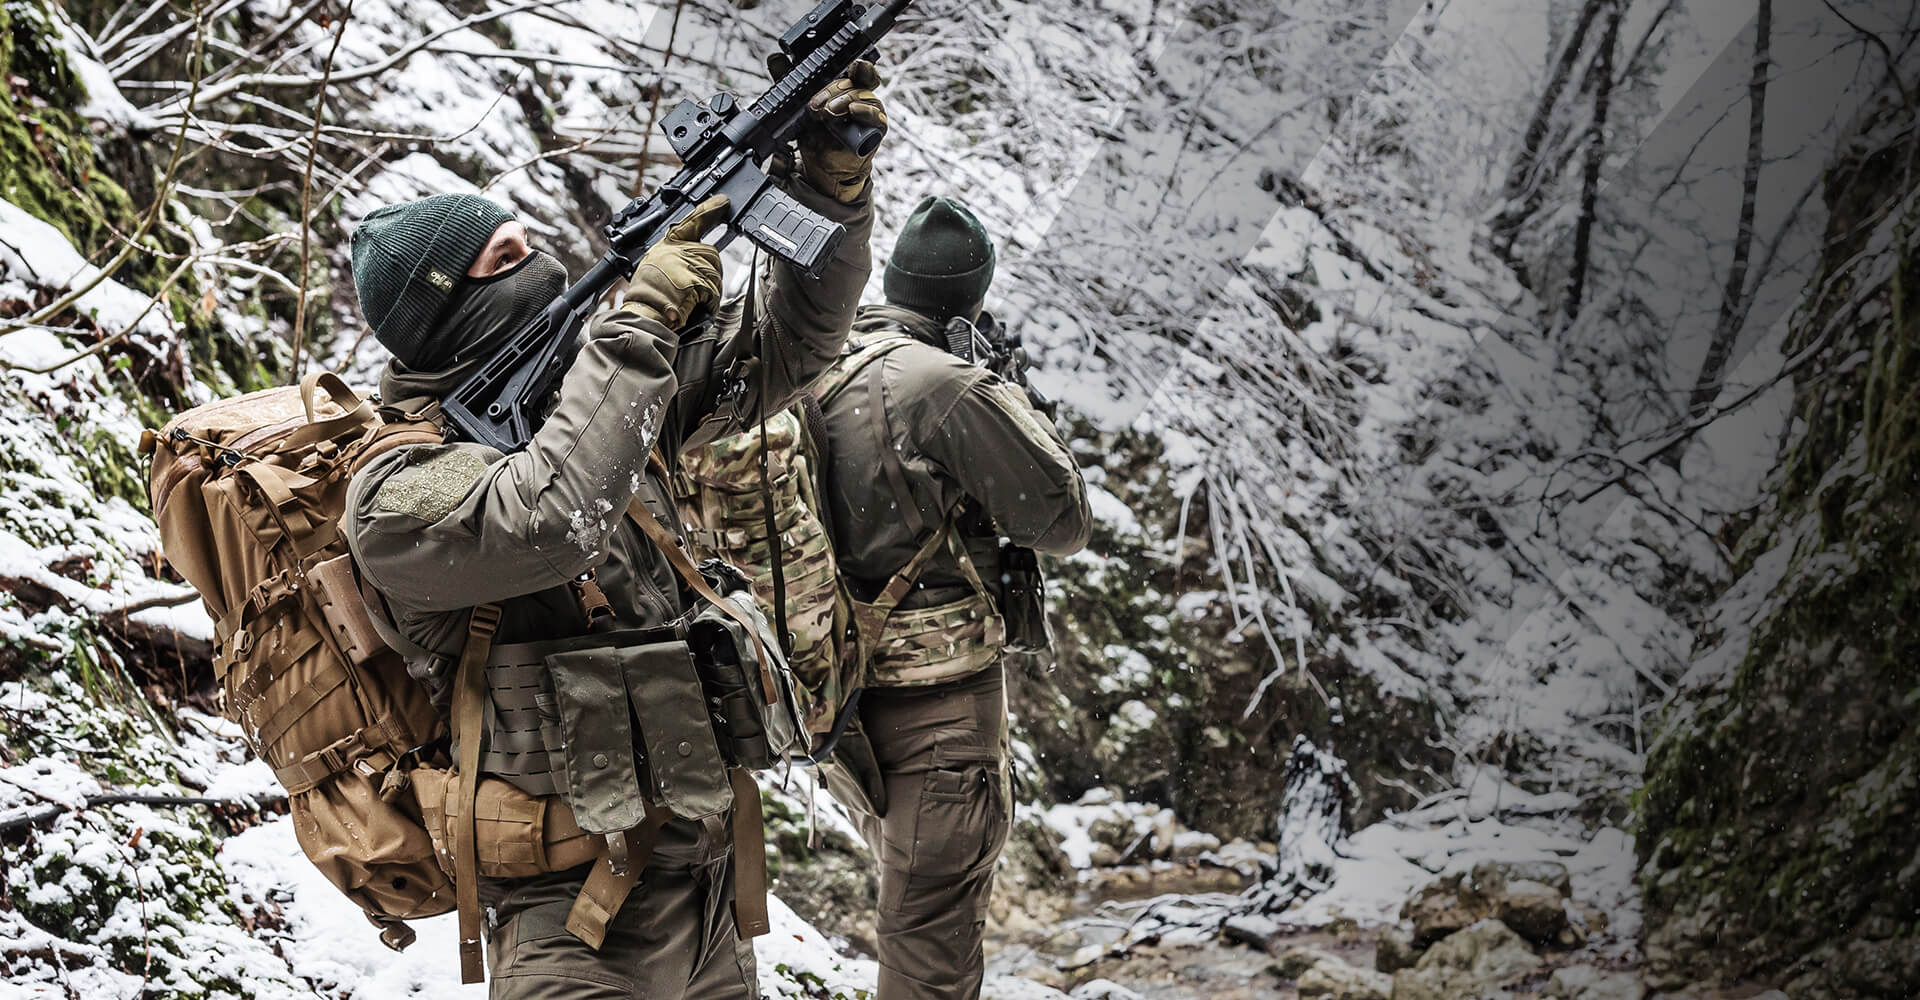 Tactical Insulated Pants, Keep warm in extreme cold